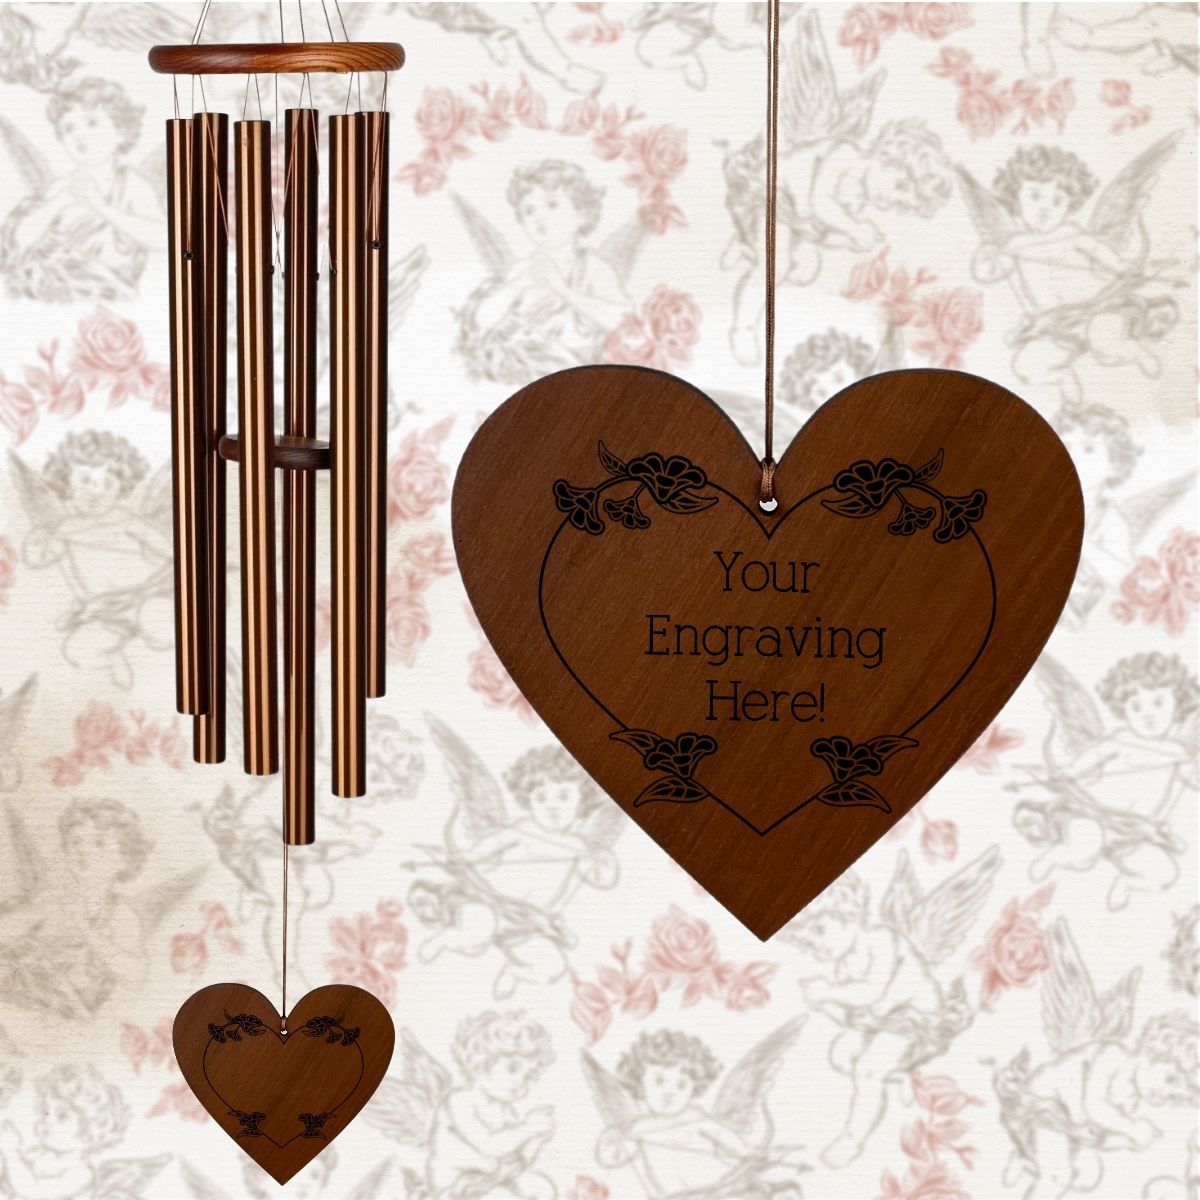 Amazing Grace Bronze 40 Inch Wind Chime - Engravable Blossom Heart Sail